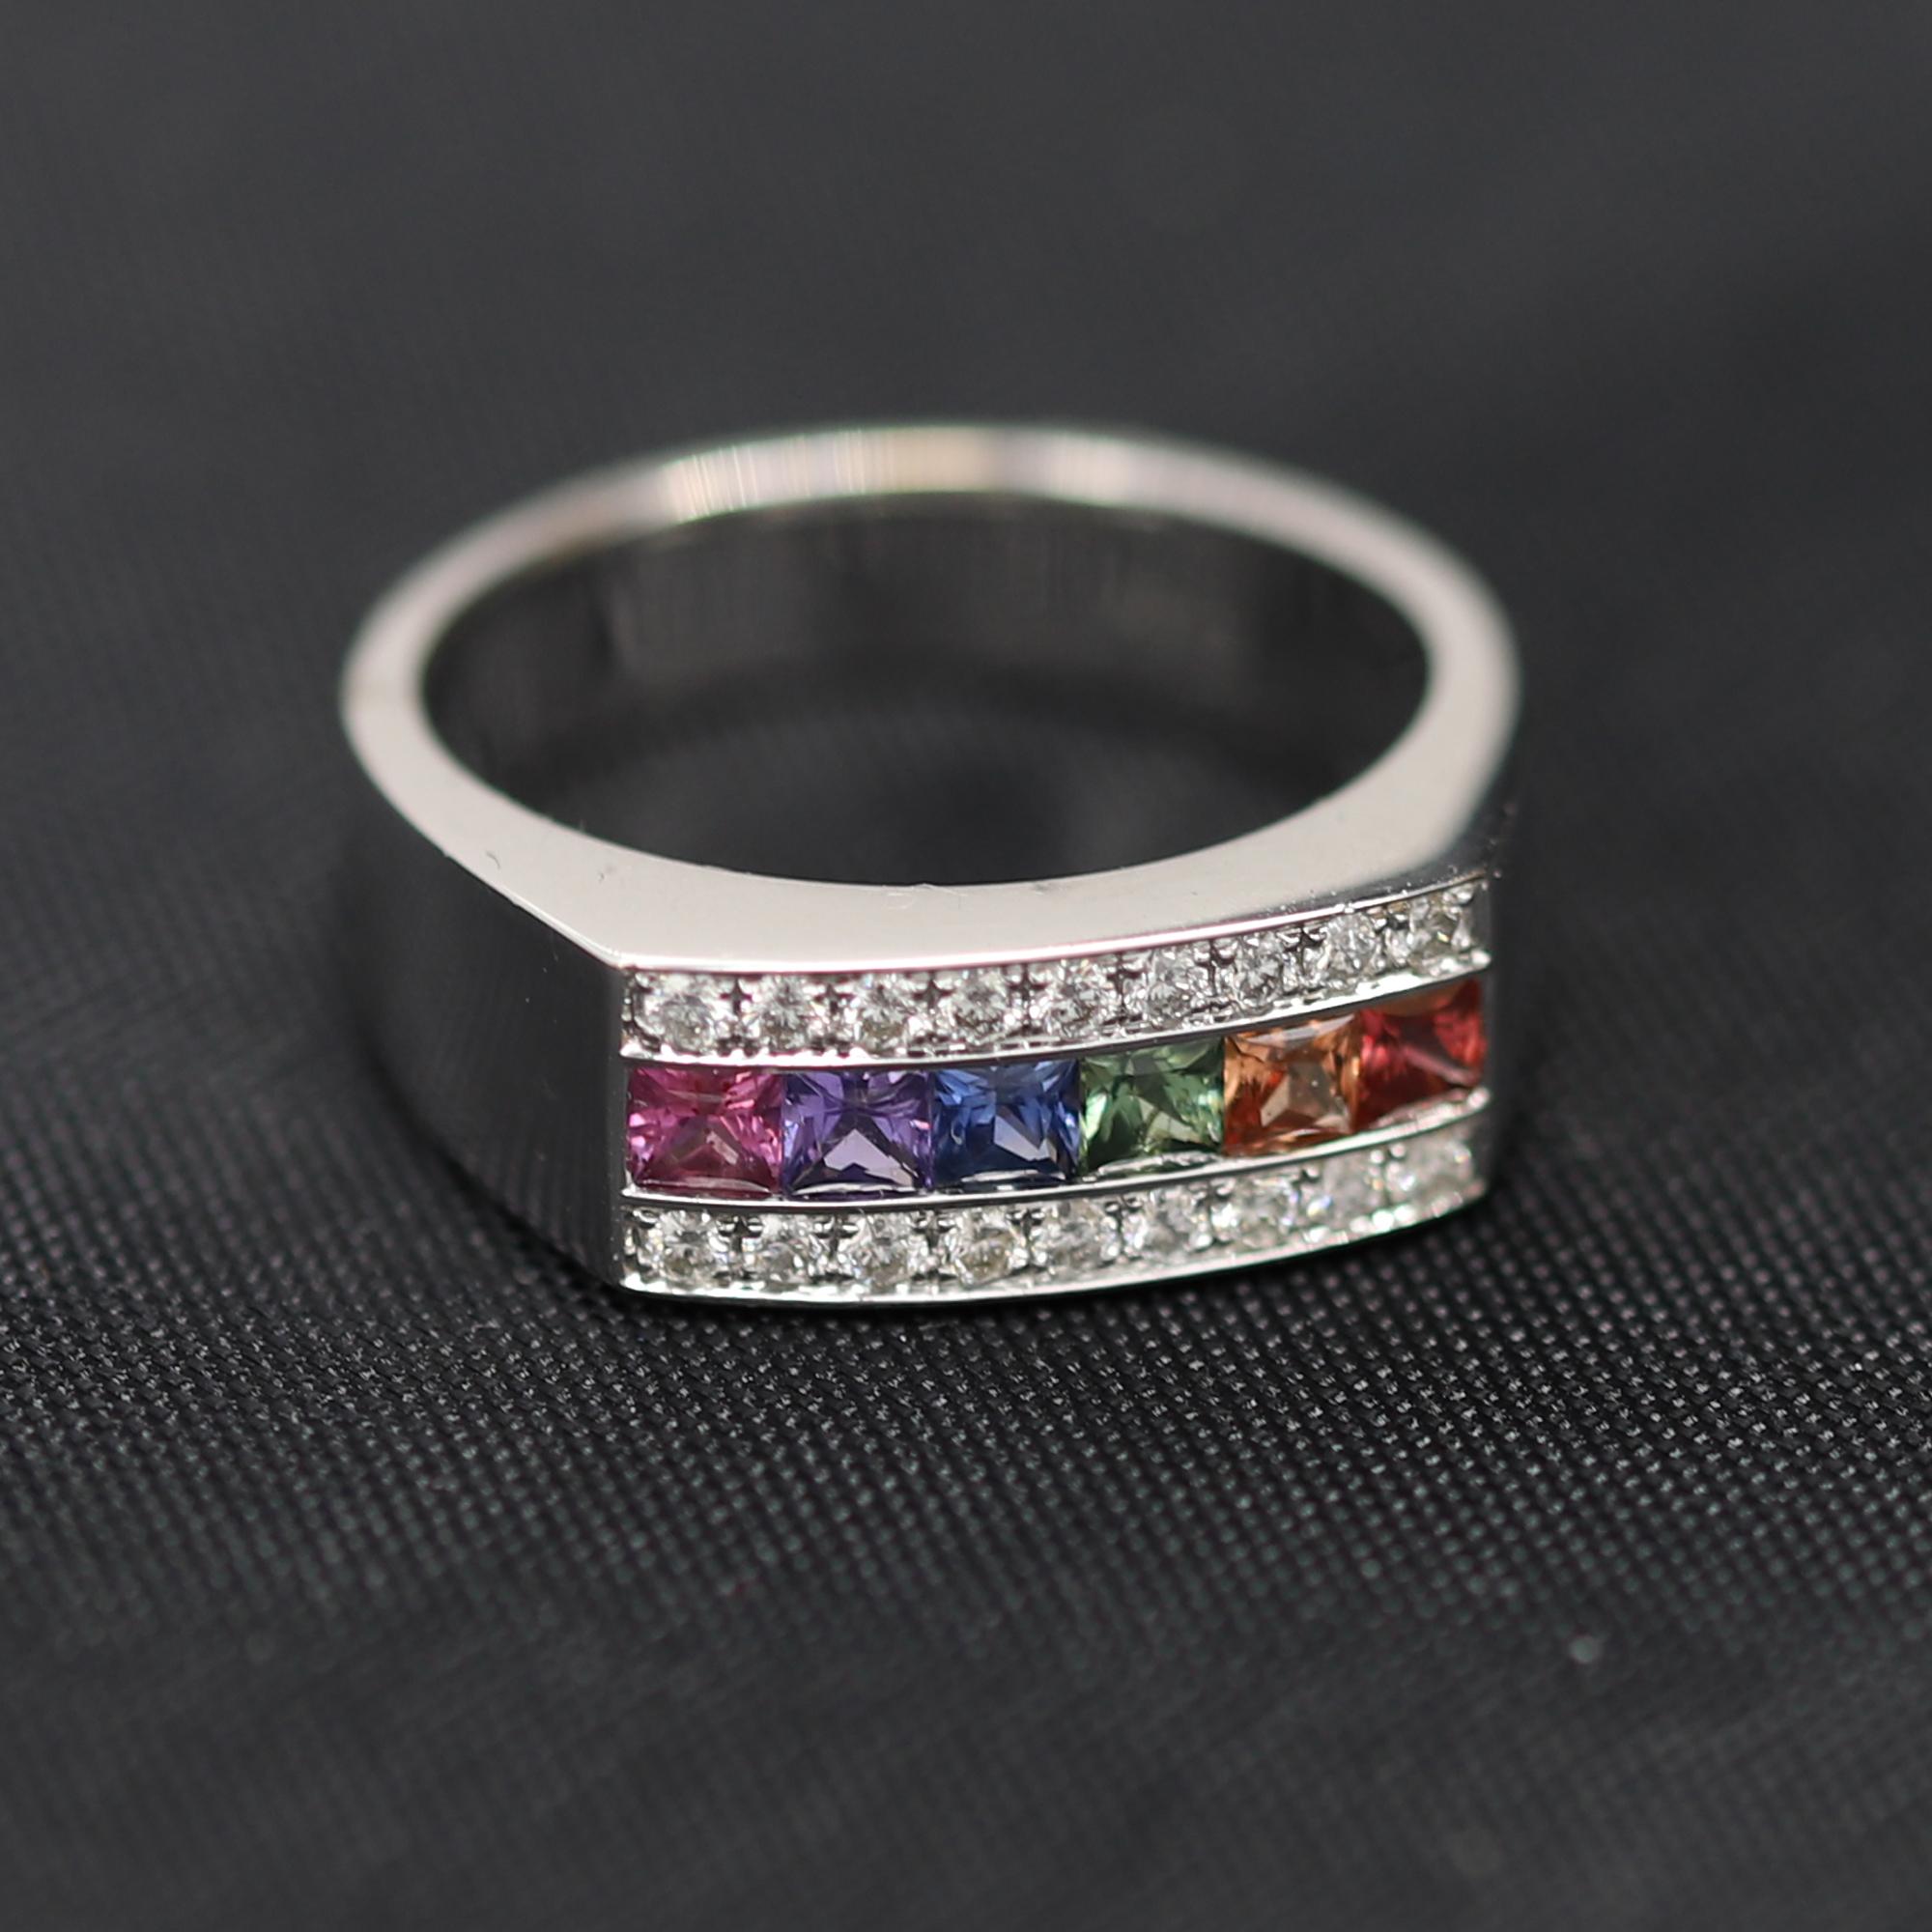 Brilliant Multi Sapphire Band,
Square cut stones set in a channel settings.
Multi Color stones  total 0.77 carat - mix brilliant colors.
Total Diamonds 0.26 carat GH-SI
18K white gold 6.5 grams
Finger size 6.75
Band width approx 7 mm
Each stone is